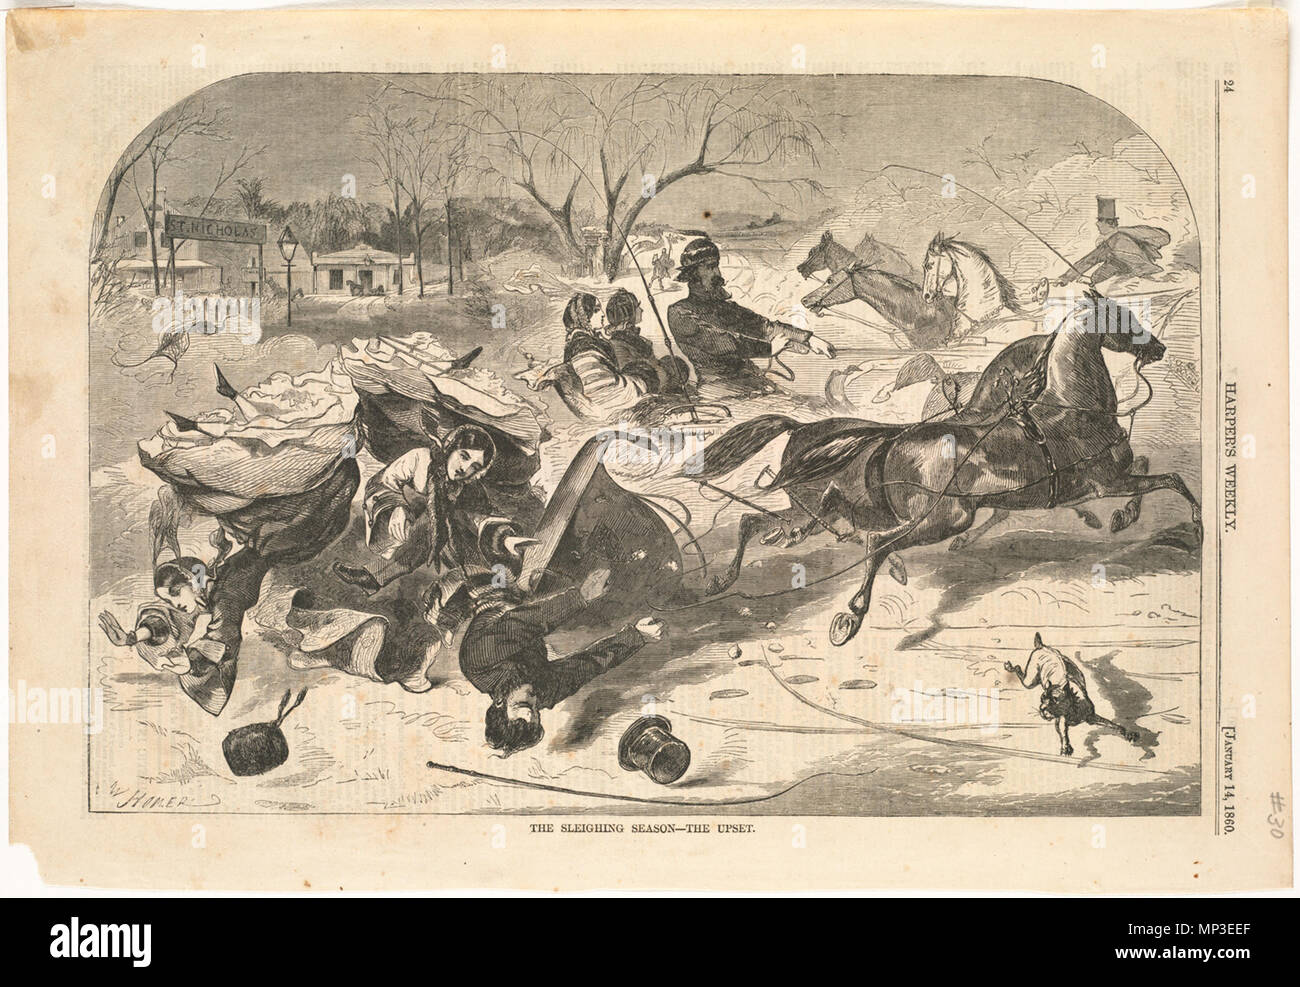 . English:   File name: 10 09 000030 Title: The sleighing season -- The upset Creator/Contributor: Homer, Winslow, 1836-1910 (artist) Date issued: 1860-01-14 Physical description: 1 print : wood engraving Genre: Wood engravings; Periodical illustrations Notes: Published in: Harper's Weekly, Volume IV, 14 January 1860, p. 24.; Signed lower left: W Homer. Collection: Winslow Homer Collection Location: Boston Public Library, Print Department Rights: No known restrictions Flickr data on 2011-08-11: Camera: Sinar AG Sinarback 54 FW, Sinar m Tags: Winslow Homer User: Boston Public Library BPL  . 23  Stock Photo